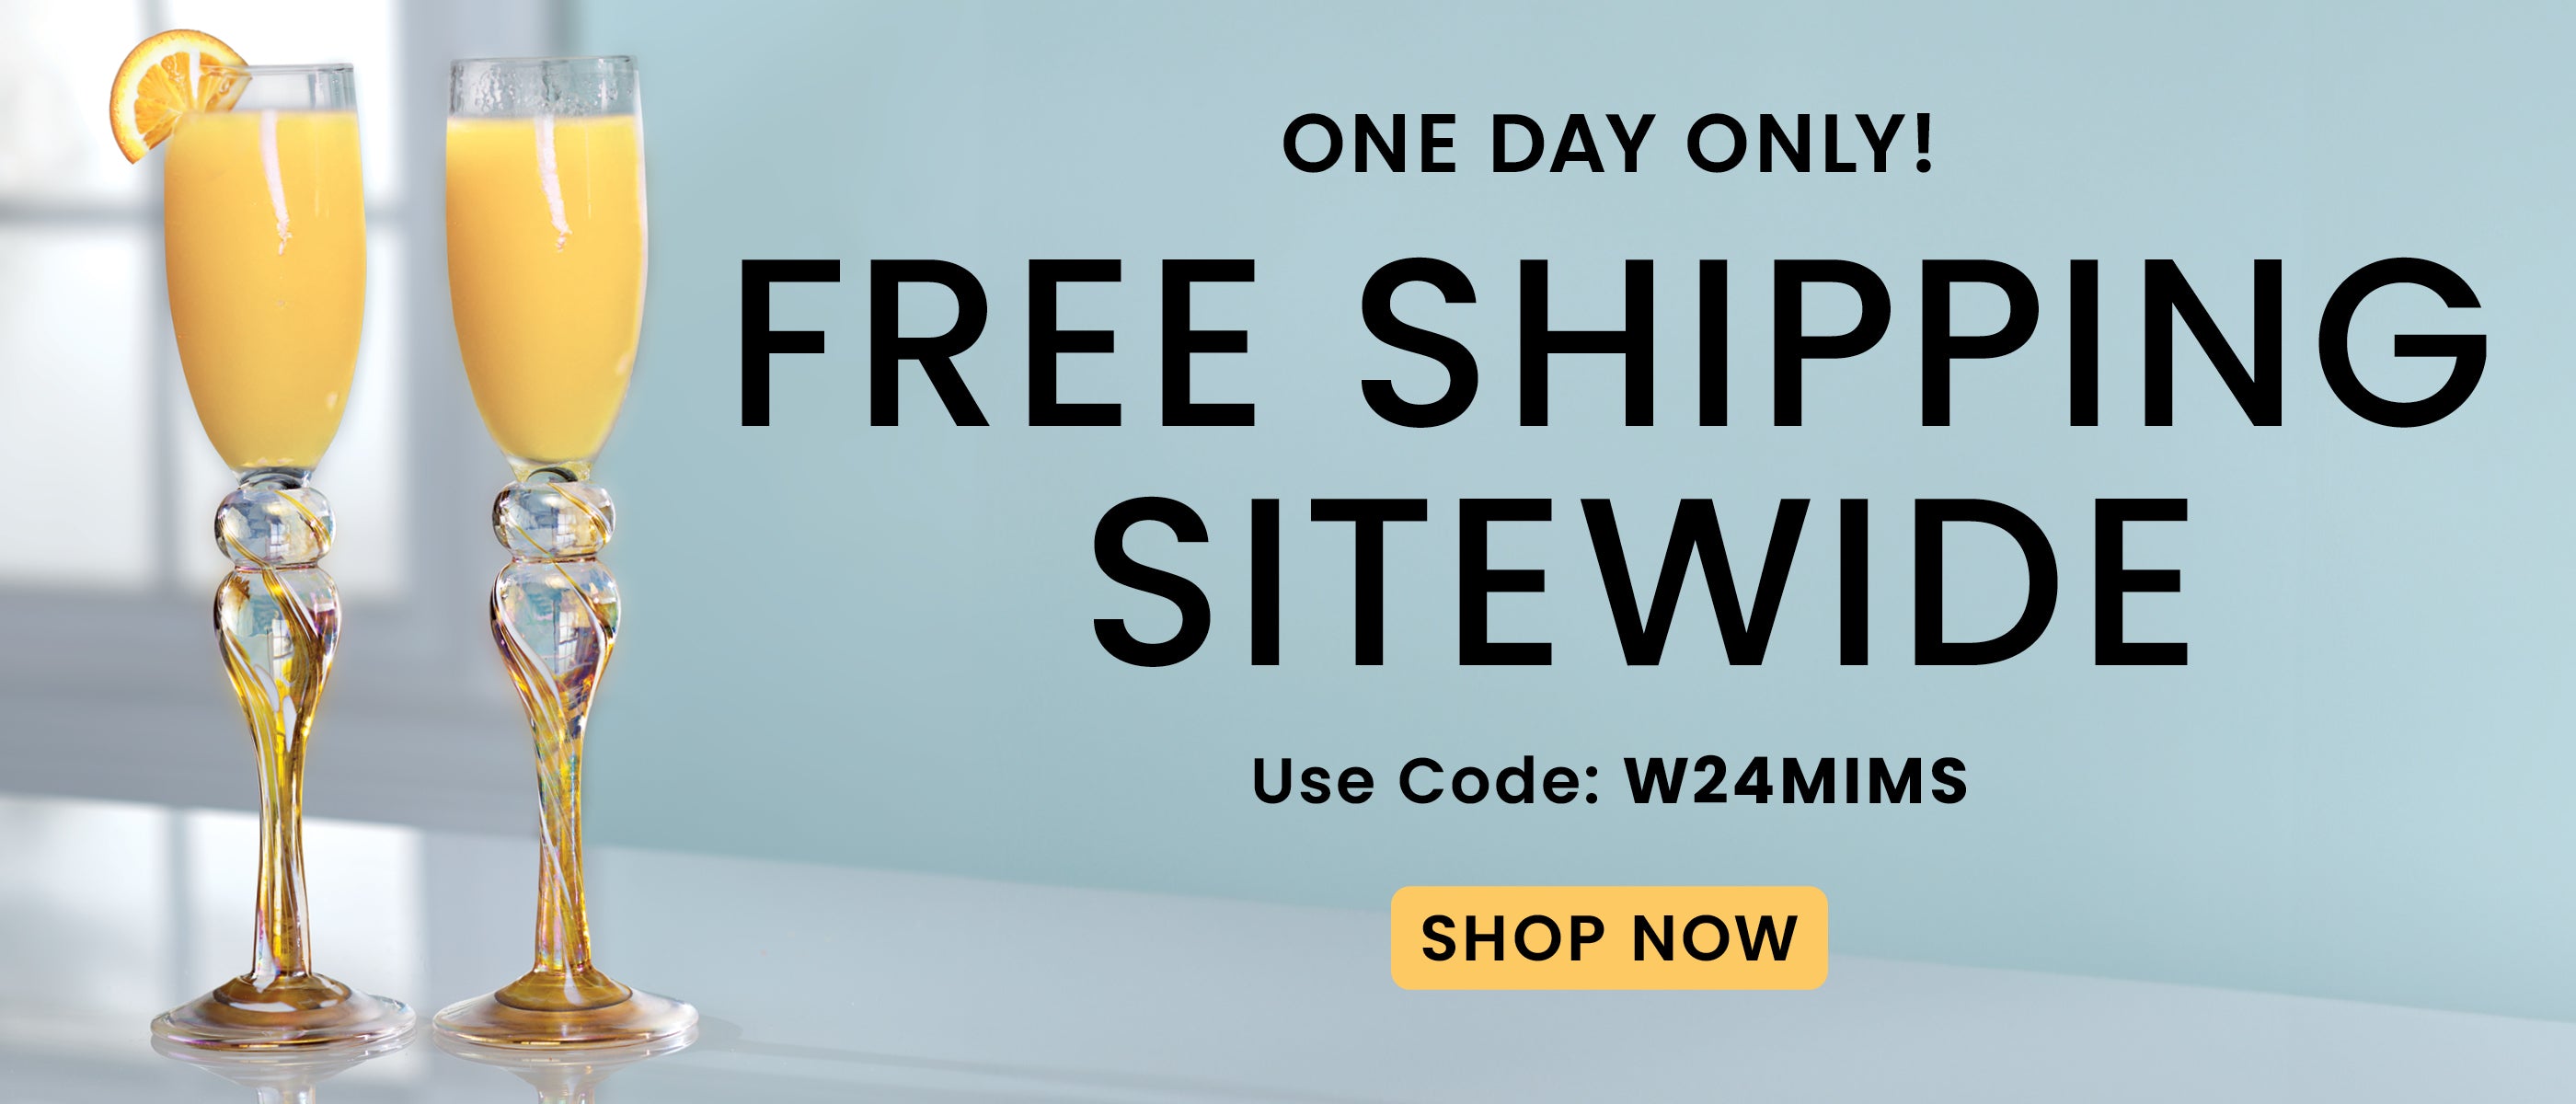 Free Shipping Sitewide | Use Code: W24MIMS